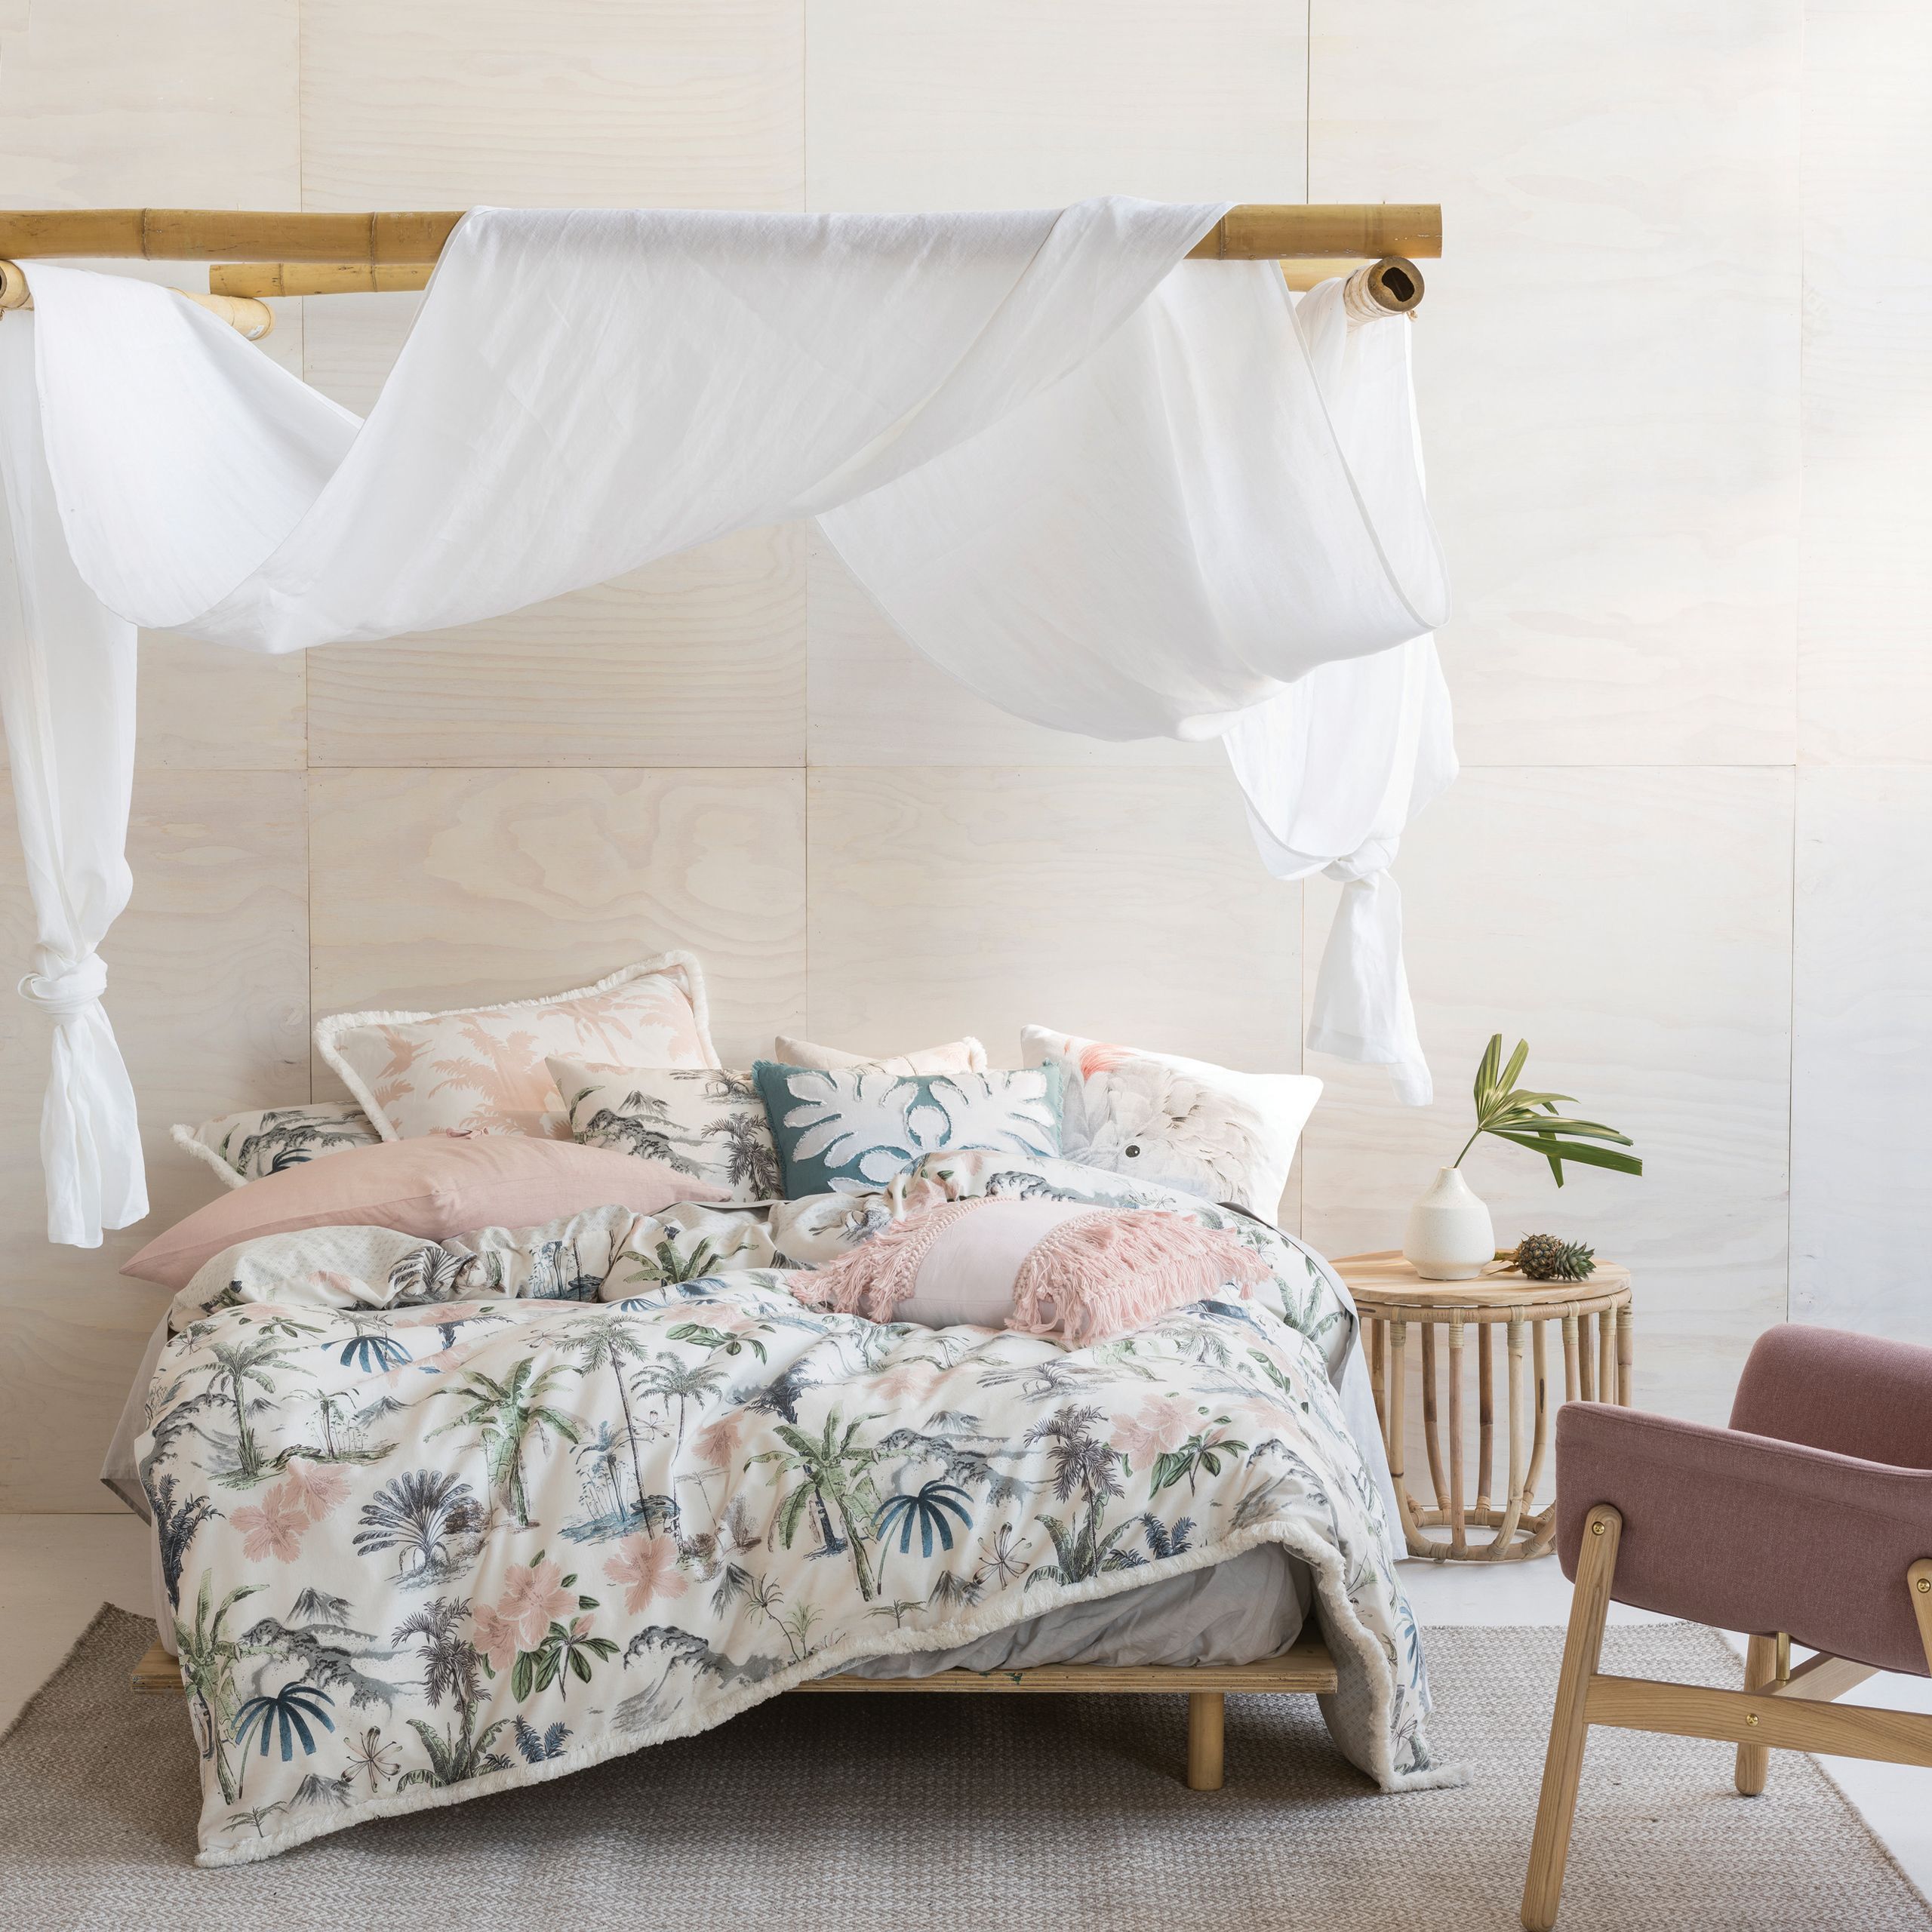 Luana will reignite every one of those delightful summer memories with its printed, garment-washed cotton that feels beautifully soft and worn-in. The relaxed linen-look quilt cover and pillowcases feature Hawaiian-style plants and flora in eye-pleasing blues, rose pinks, greens and greys while the cover is trimmed with white-fringed cotton at the base for a nostalgic appeal.